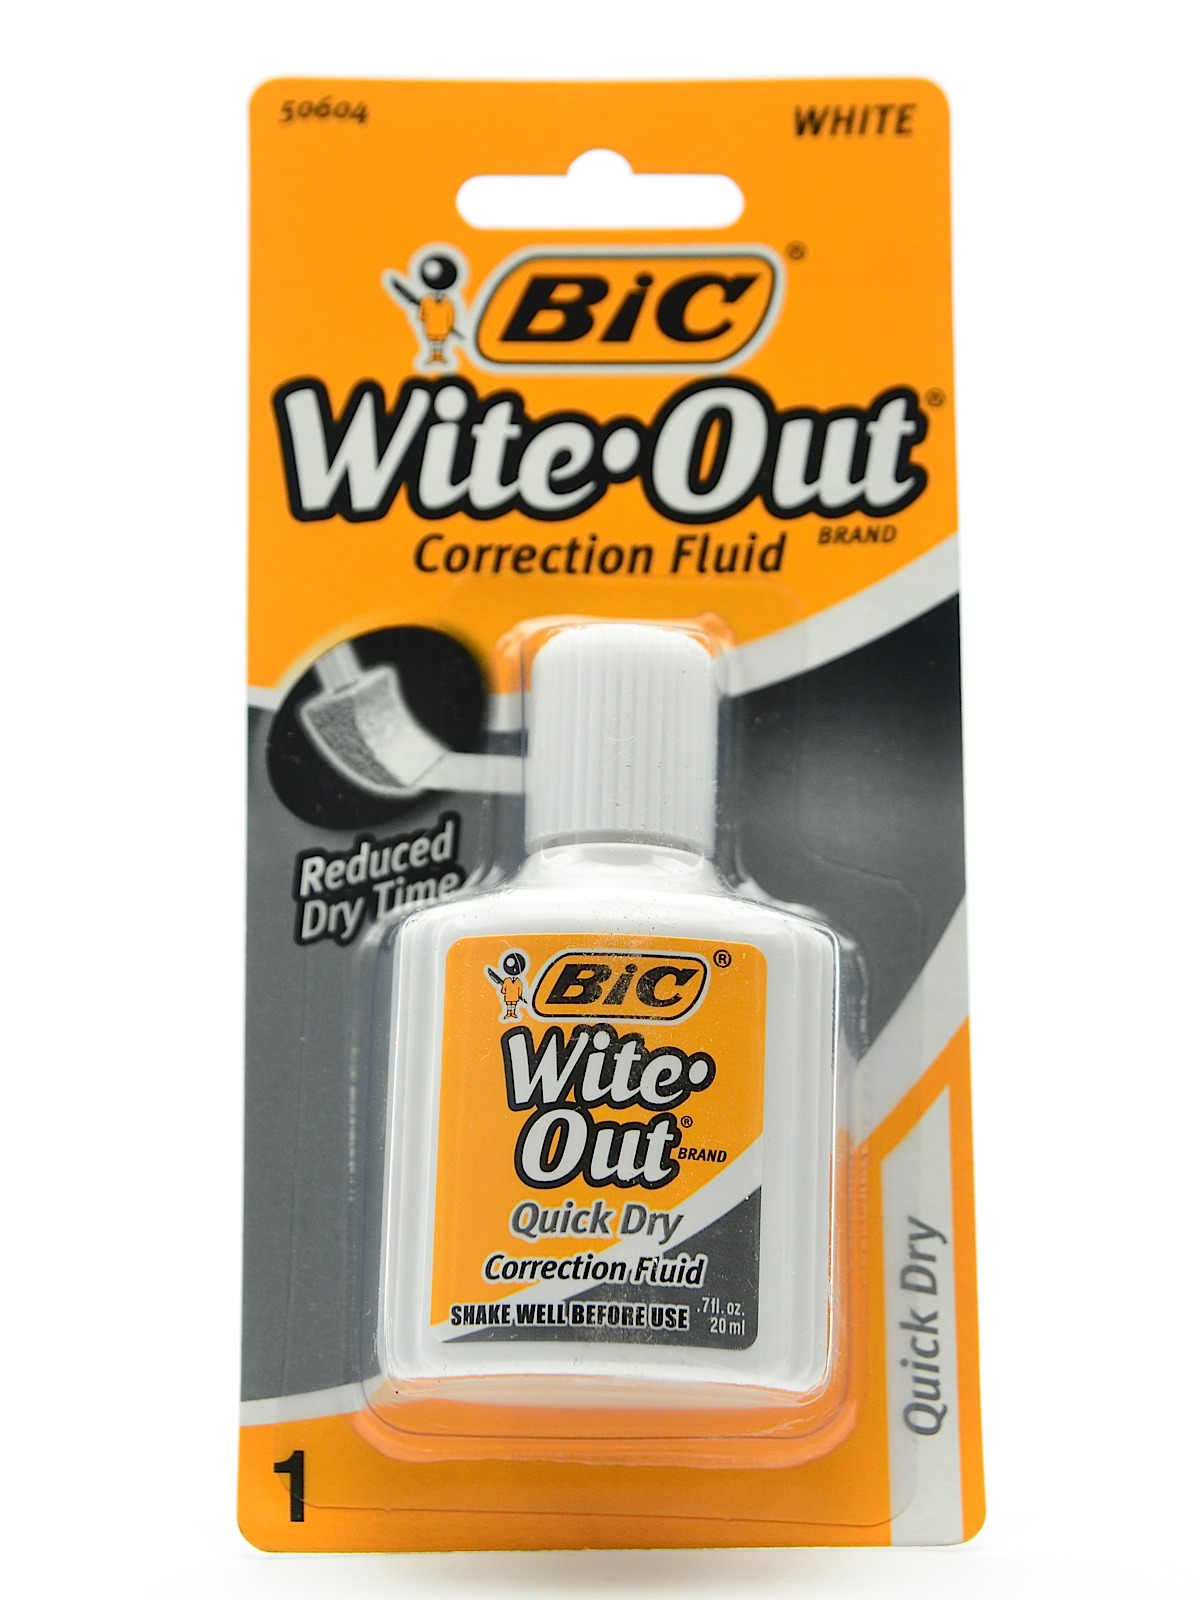 Wite-out Quick Dry Correction Fluid 0.7 Oz. Bottle